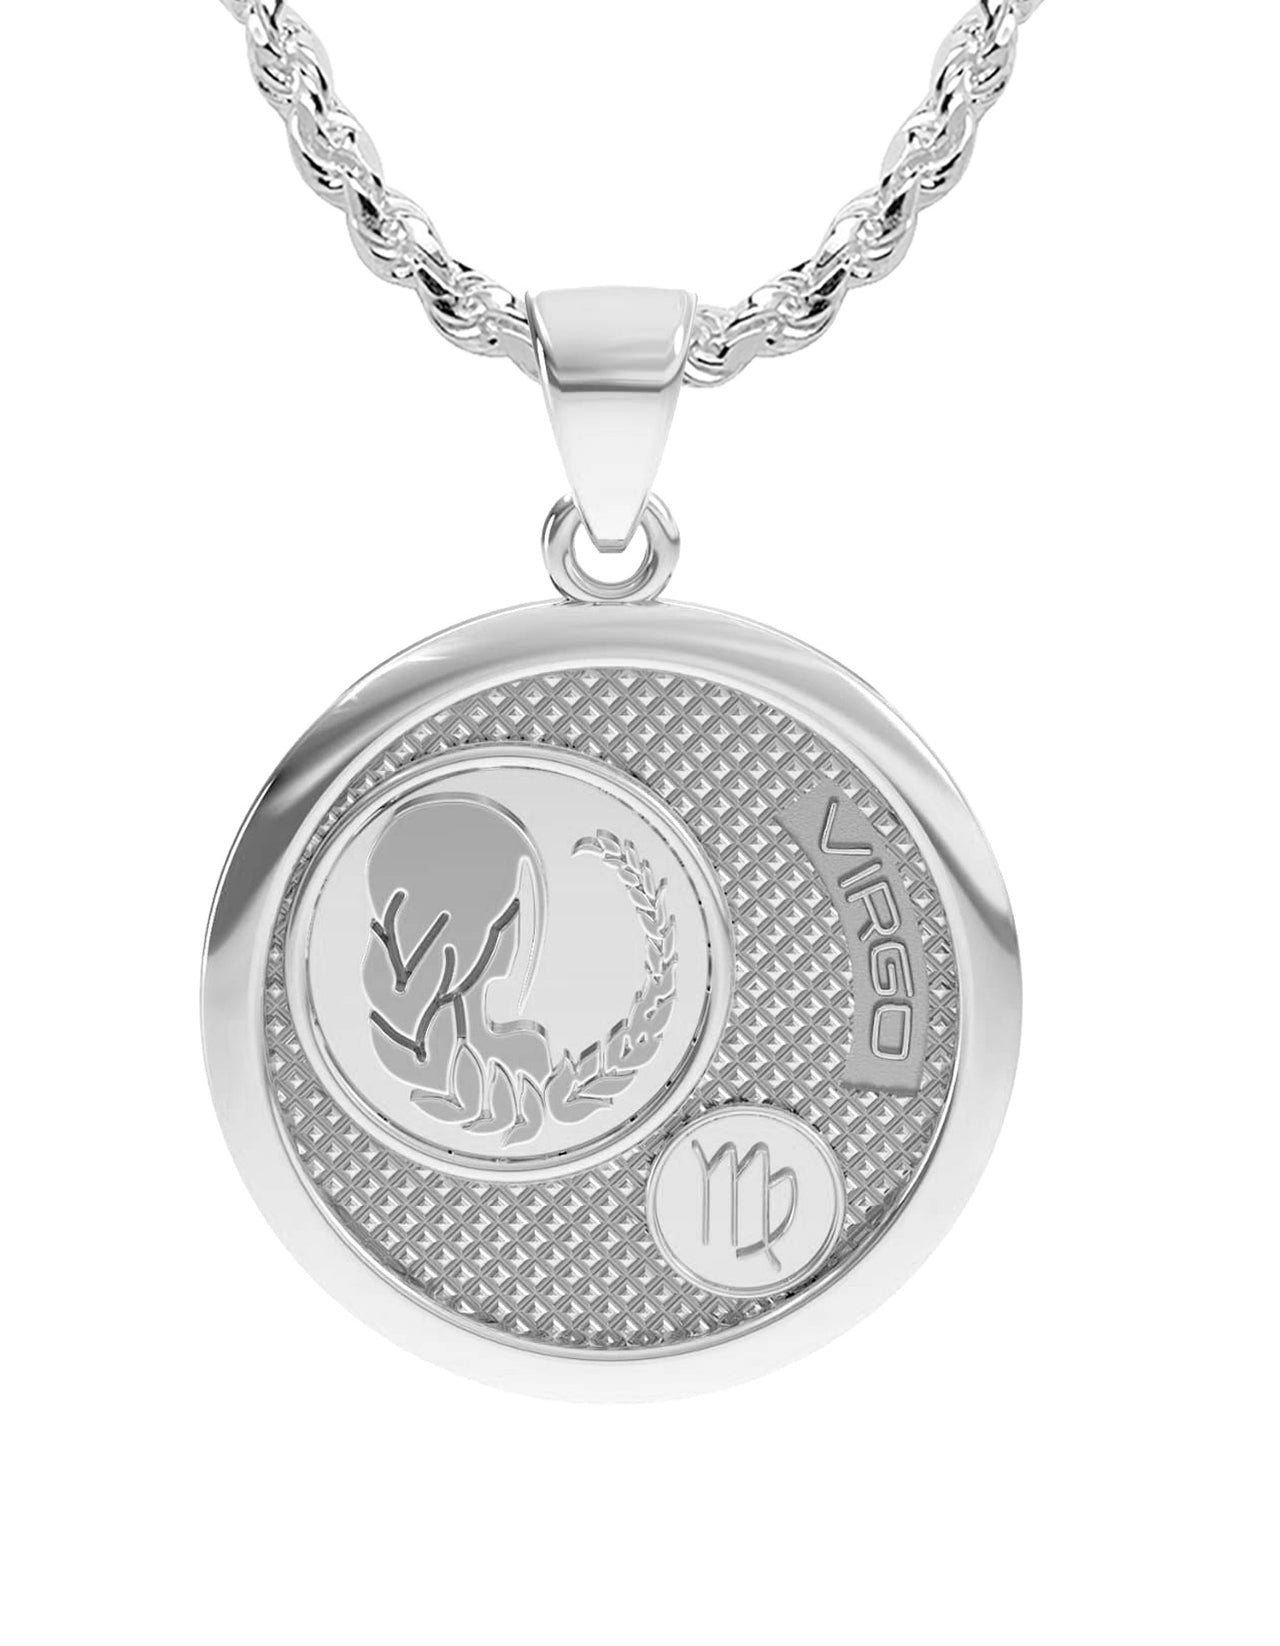 Ladies 925 Sterling Silver Round Virgo Zodiac Polished Finish Pendant Necklace, 25mm